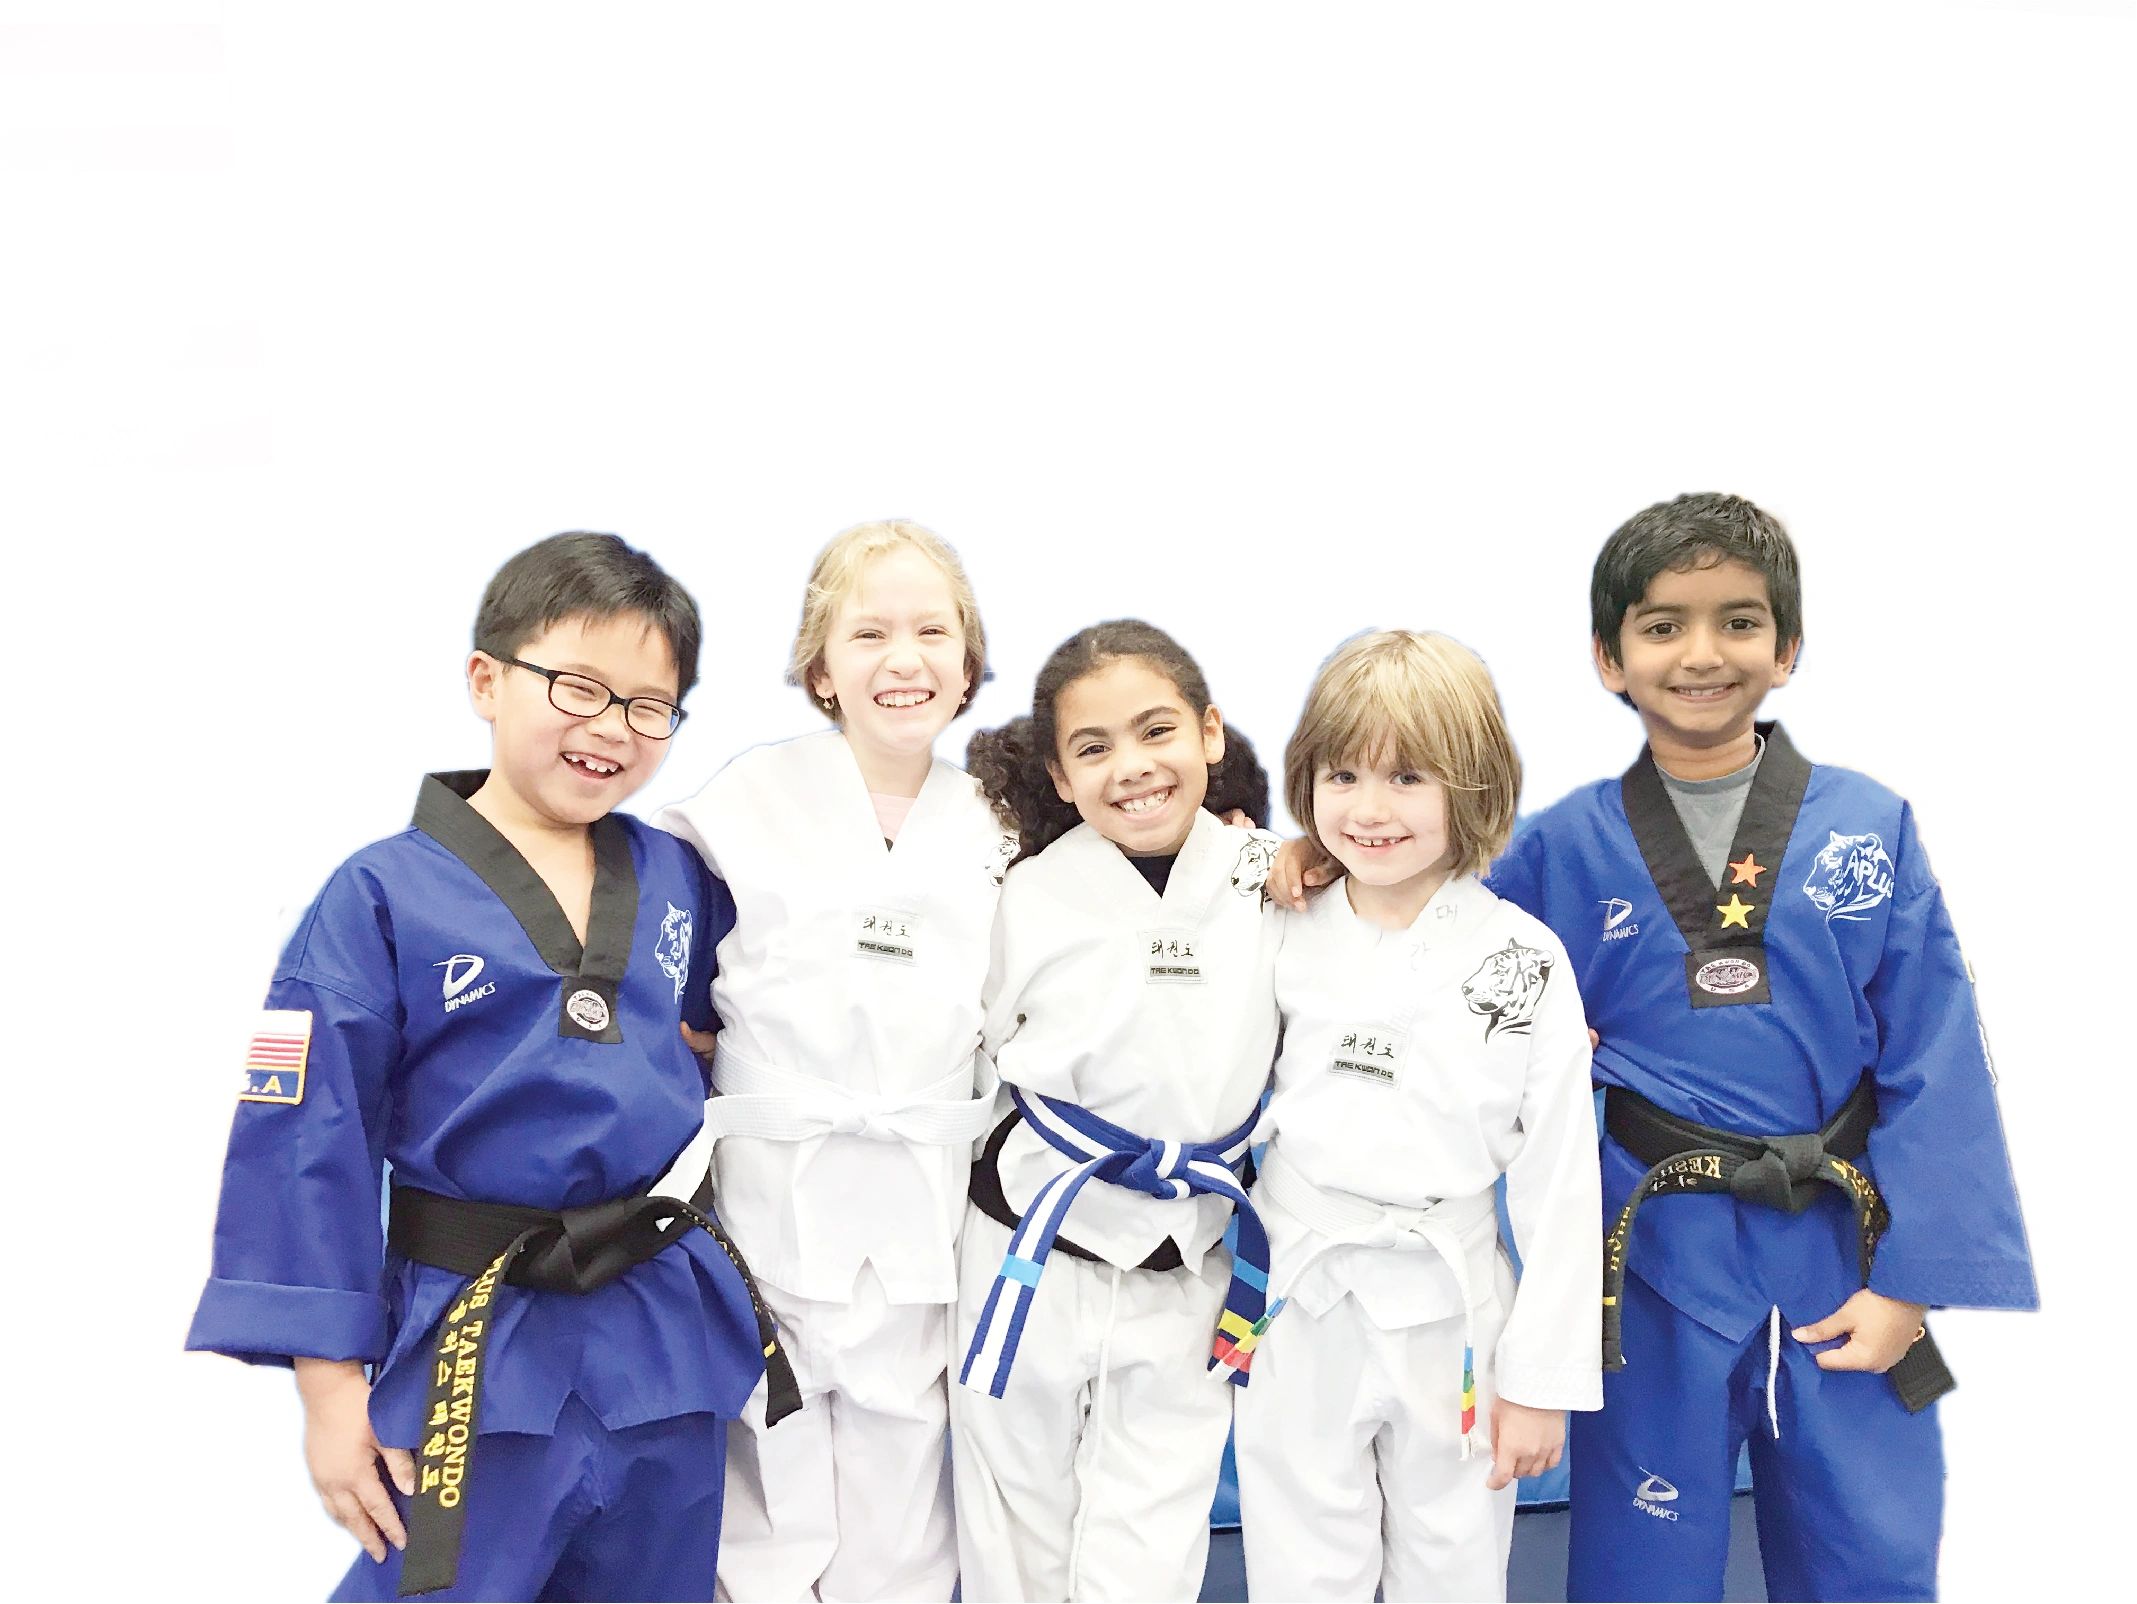 A Plus Tae Kwon Do: Martial Arts in Arlington Heights